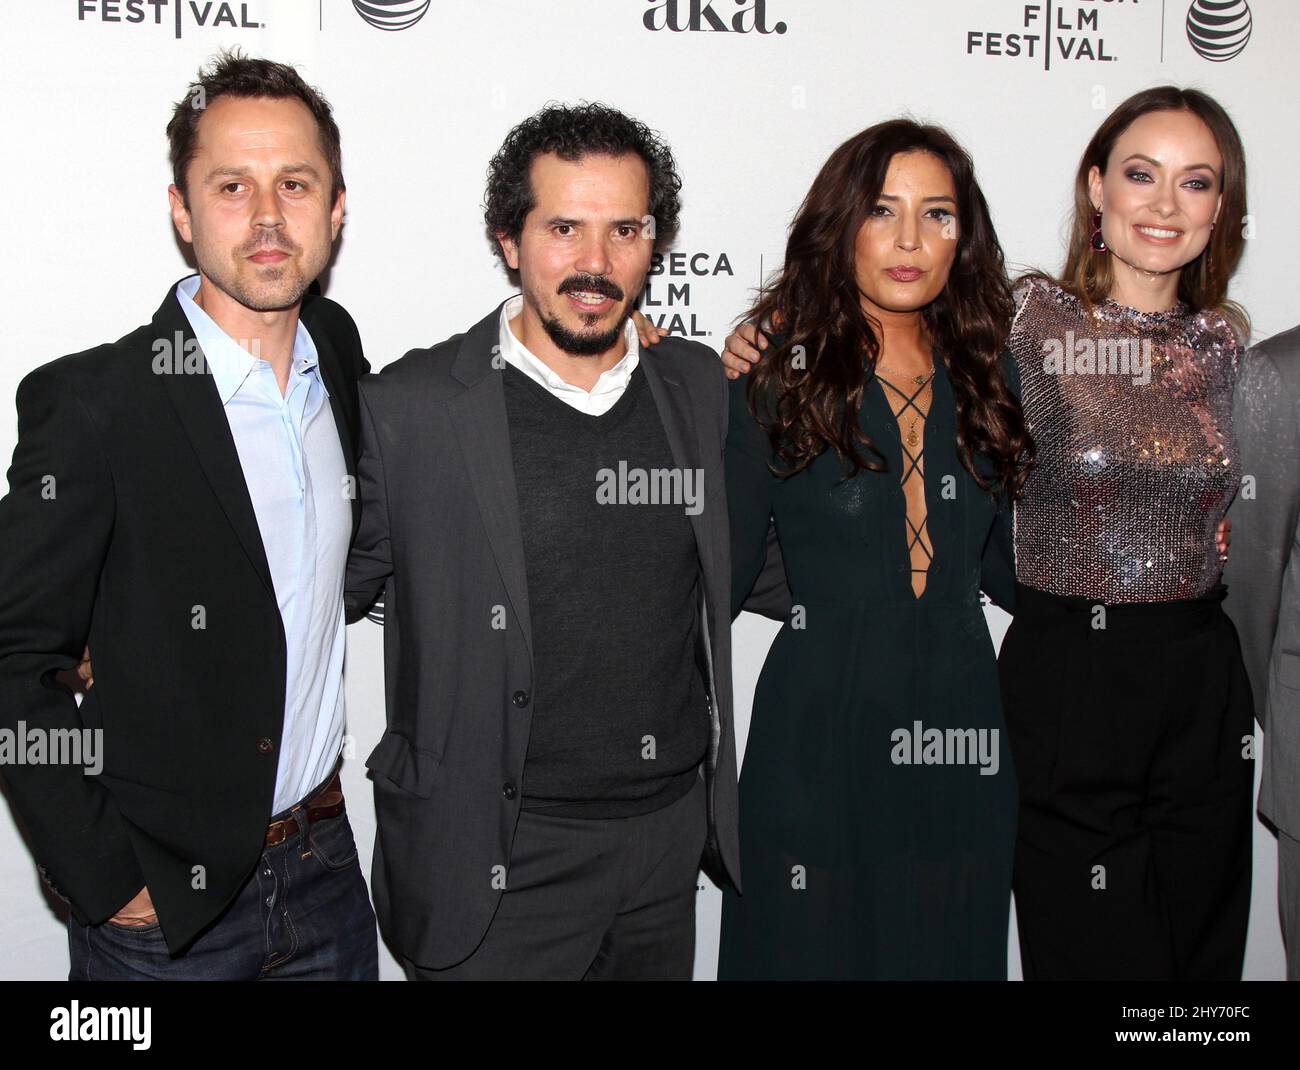 Giovanni Ribisi, John Leguizamo, Reed Morano and Olivia Wilde attending the premiere of Narrative: Meadowland held at the SVA Theater in New York. Stock Photo